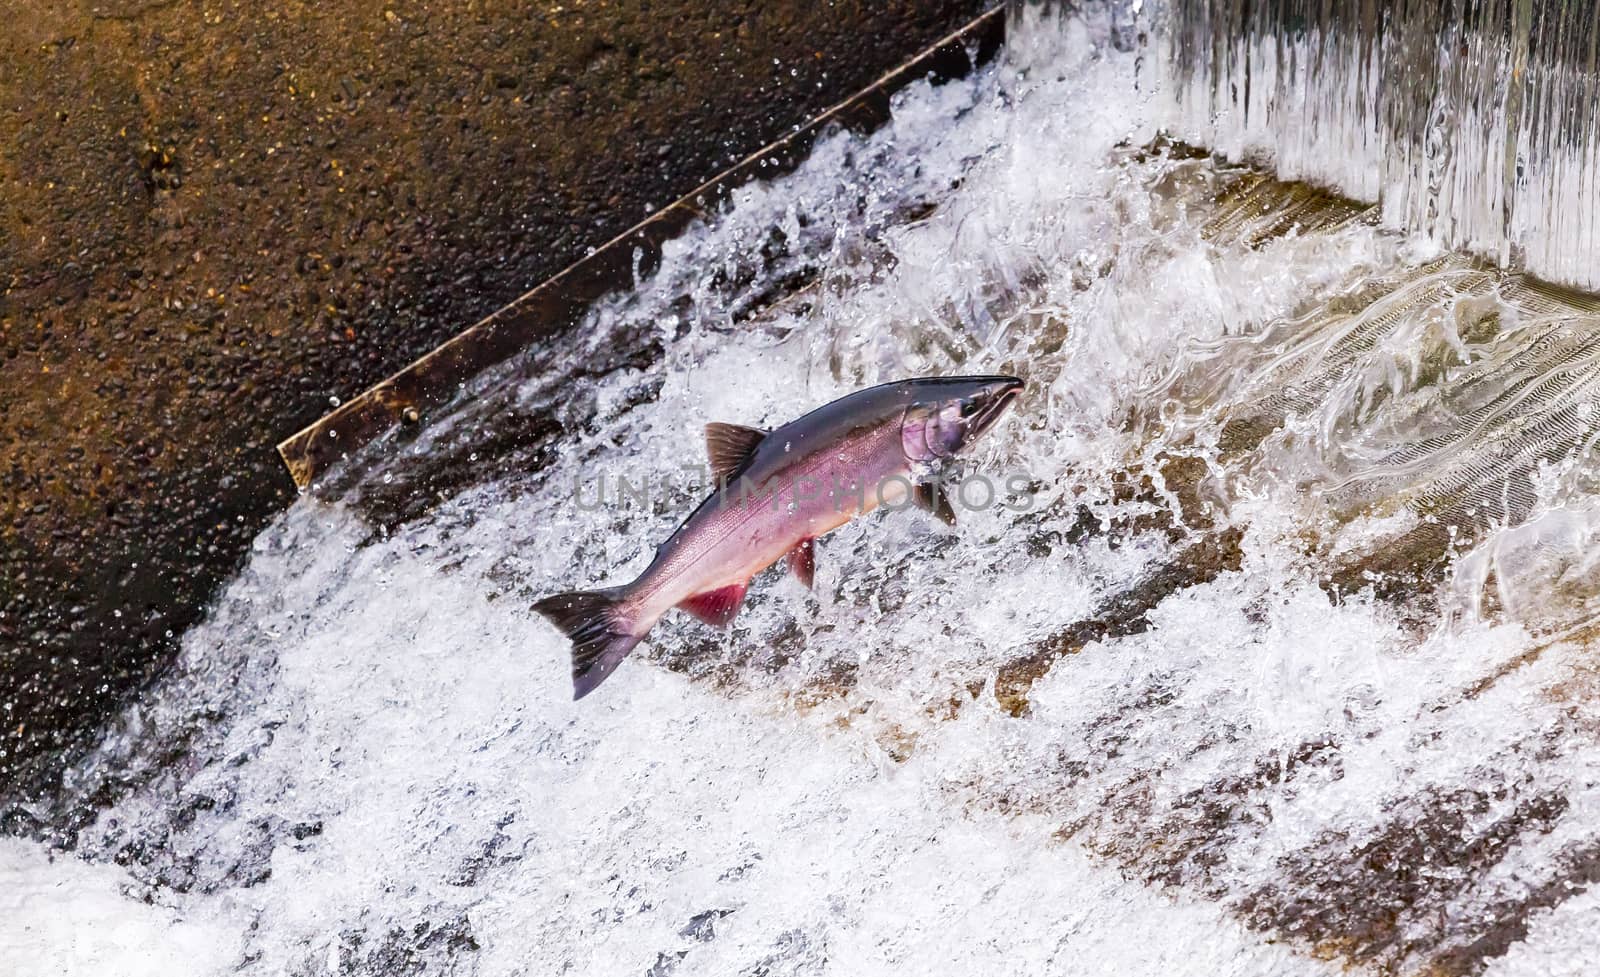 Chinook Coho Salmon Jumping Issaquah Hatchery Washington State by bill_perry